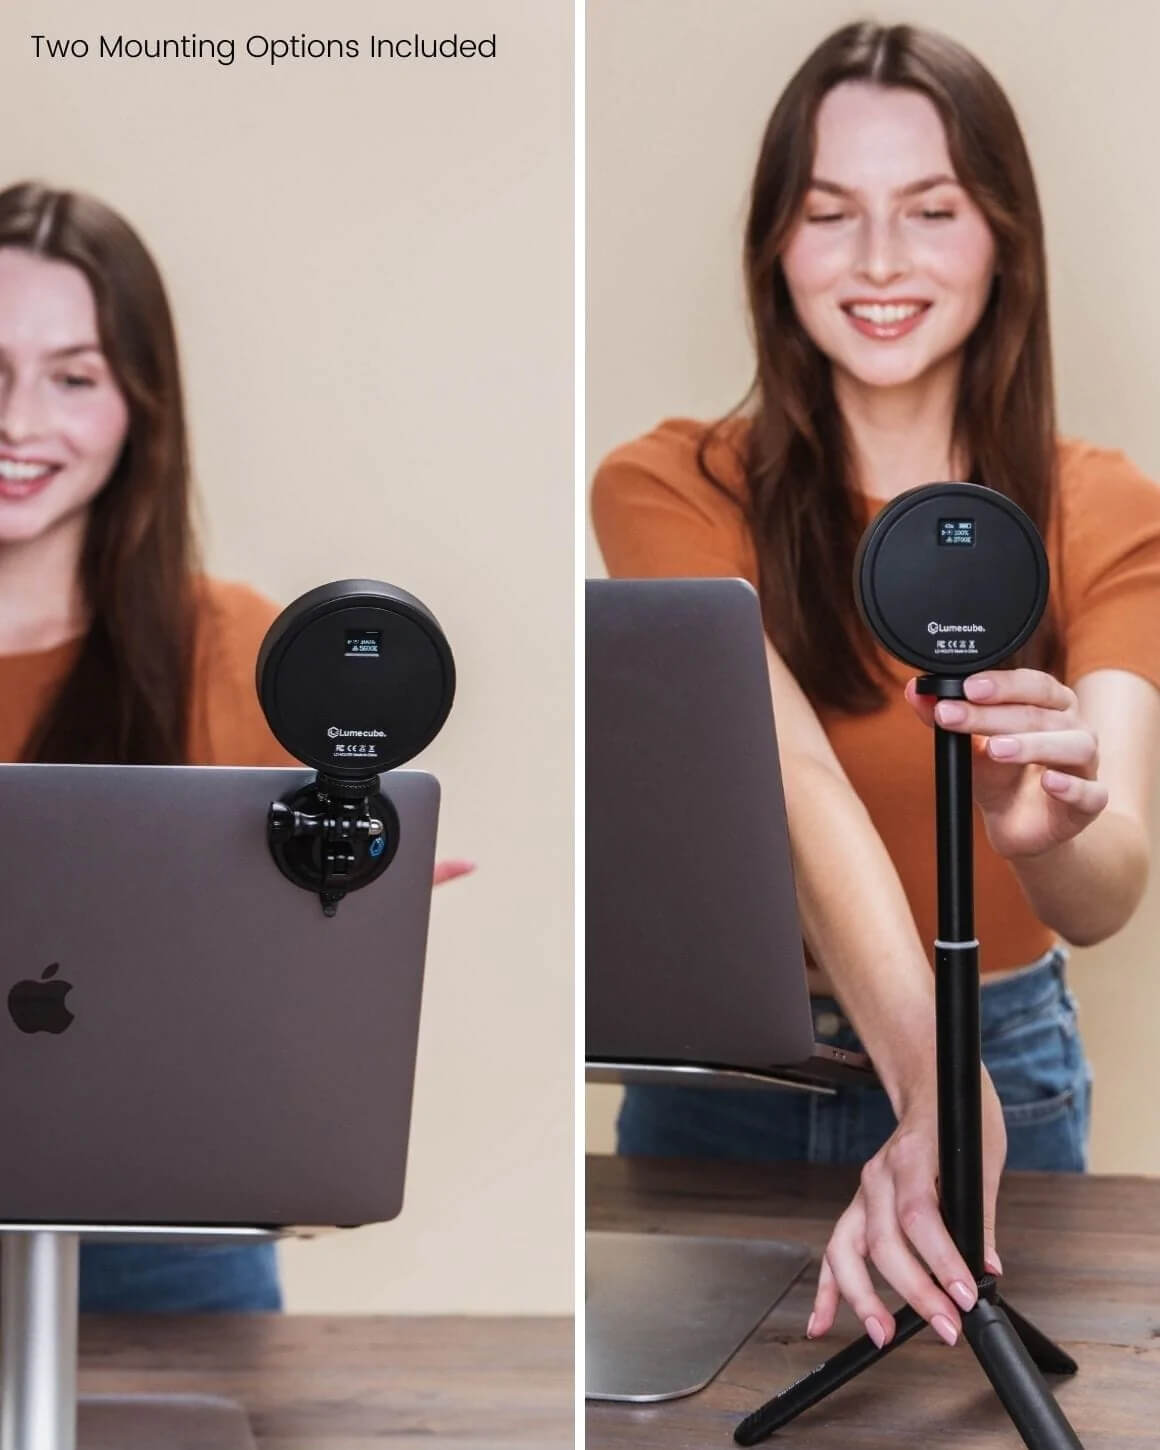 Woman using both mounting options, the Suction Mount and Stand, included with the 3.5" diameter VC-Lite LED with Stand.